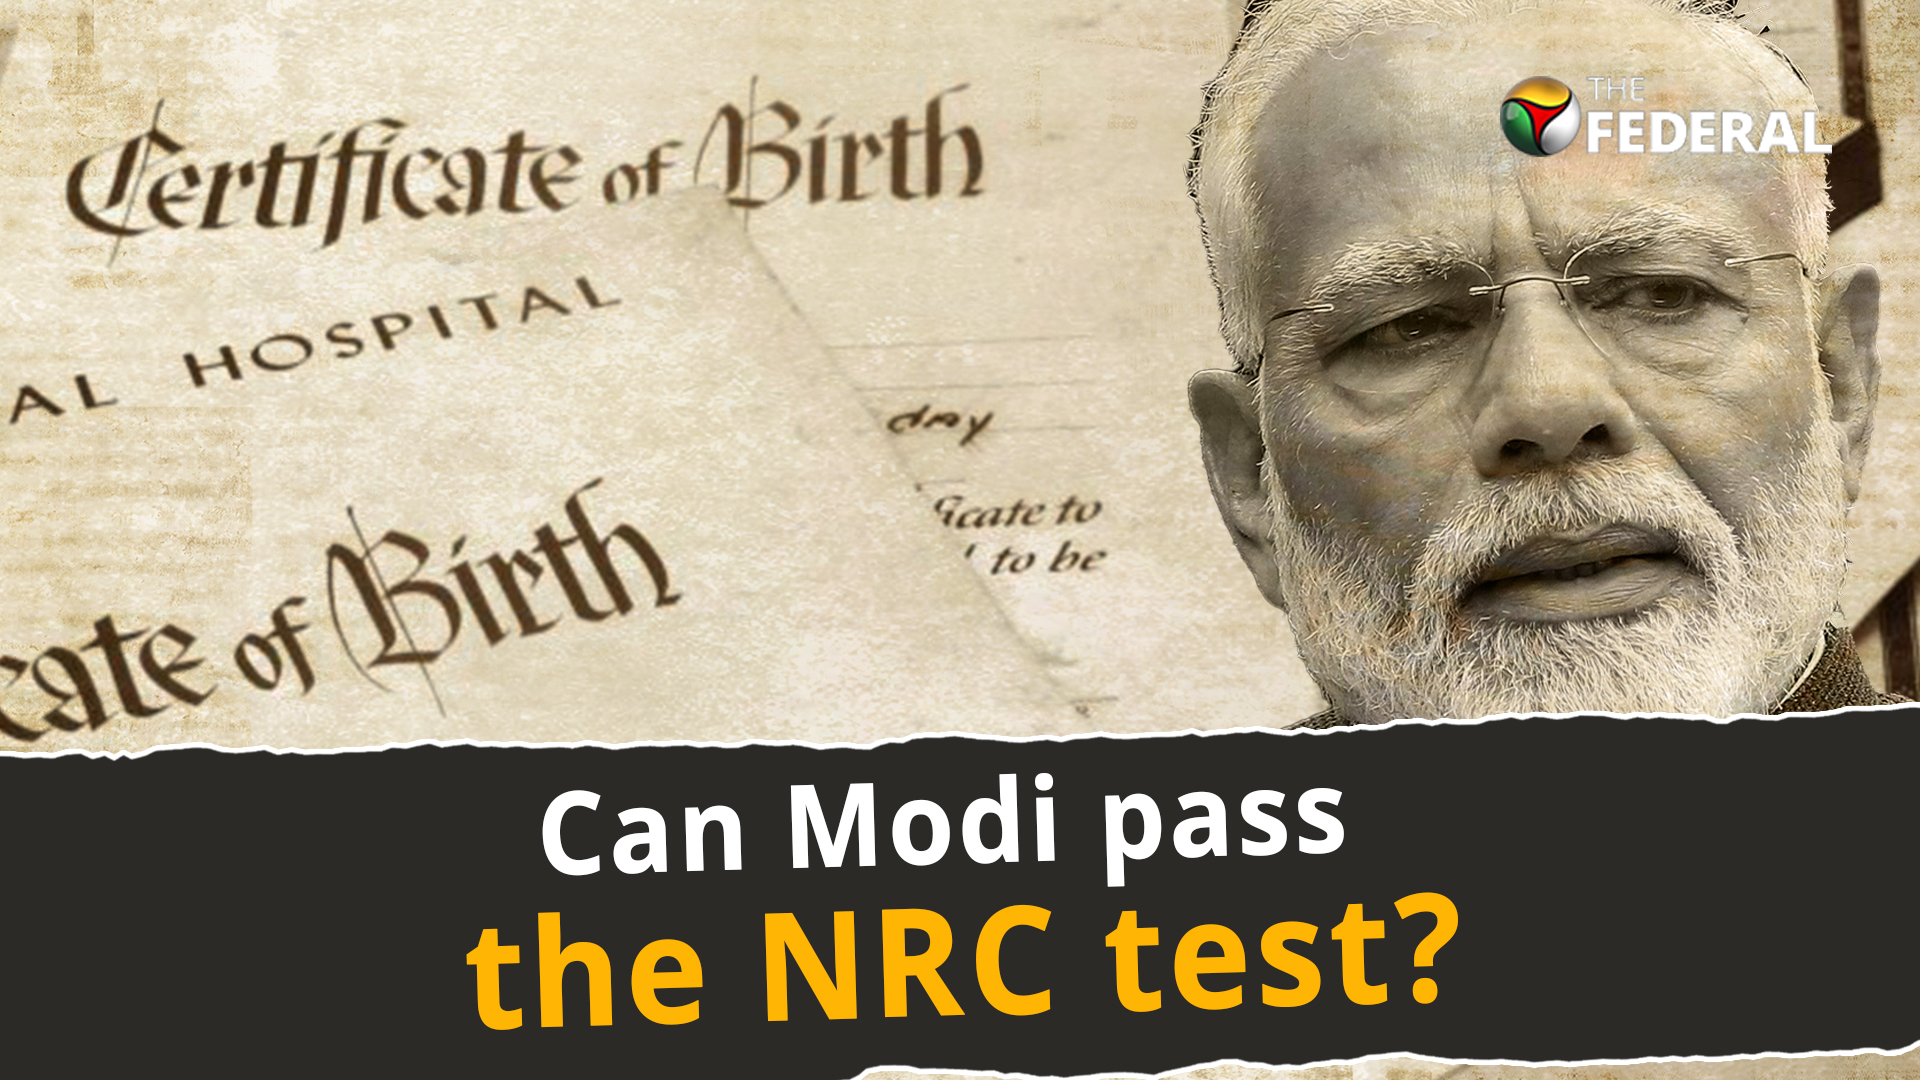 Can PM Modi pass the NRC test? Heres the truth